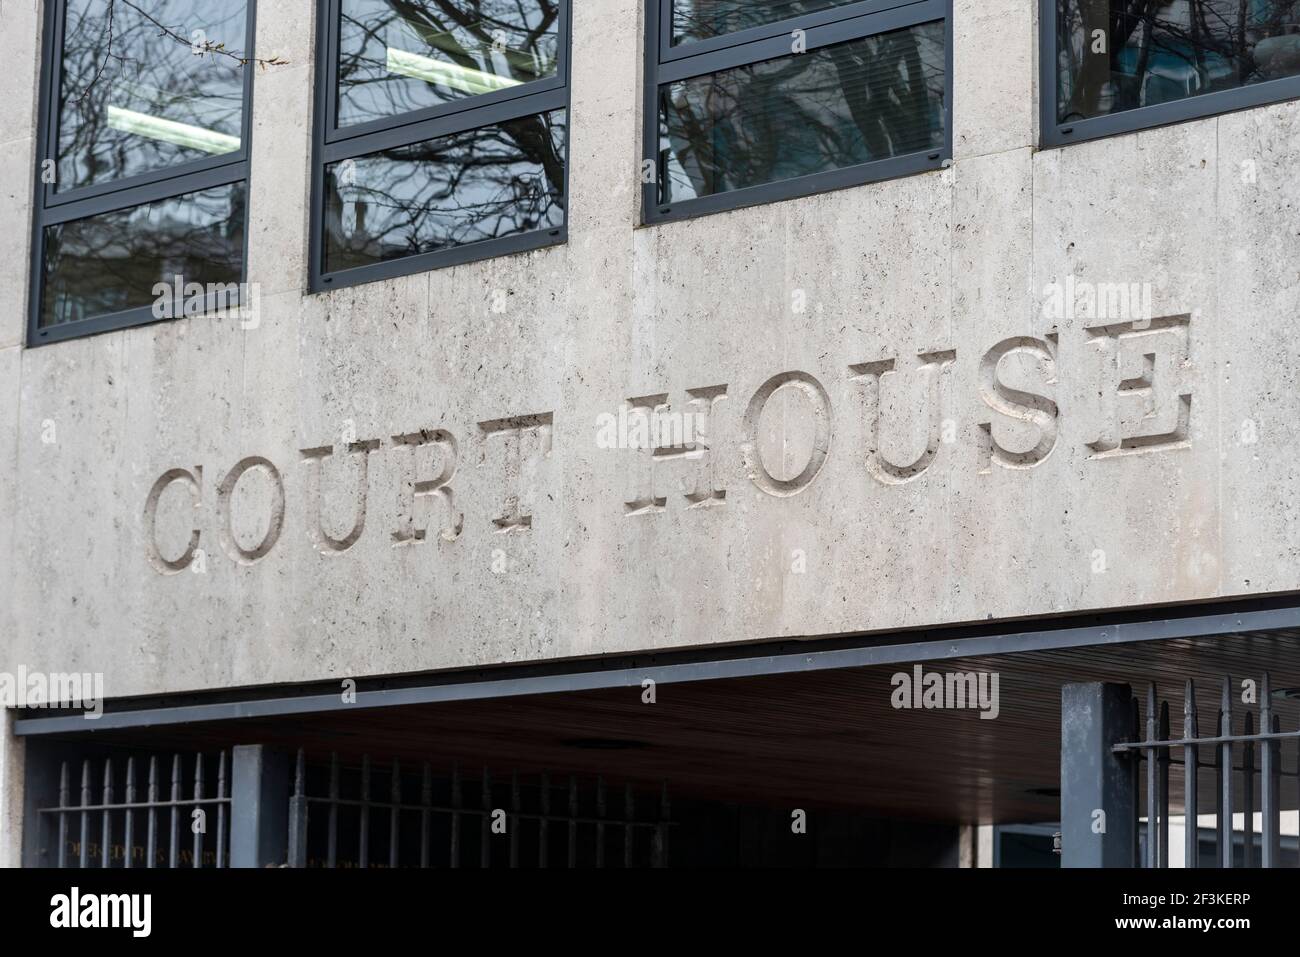 Magistrates Court House in Southend on Sea, Essex, UK. Carved stone lettering. Law, legal council magistrates judicial building Stock Photo